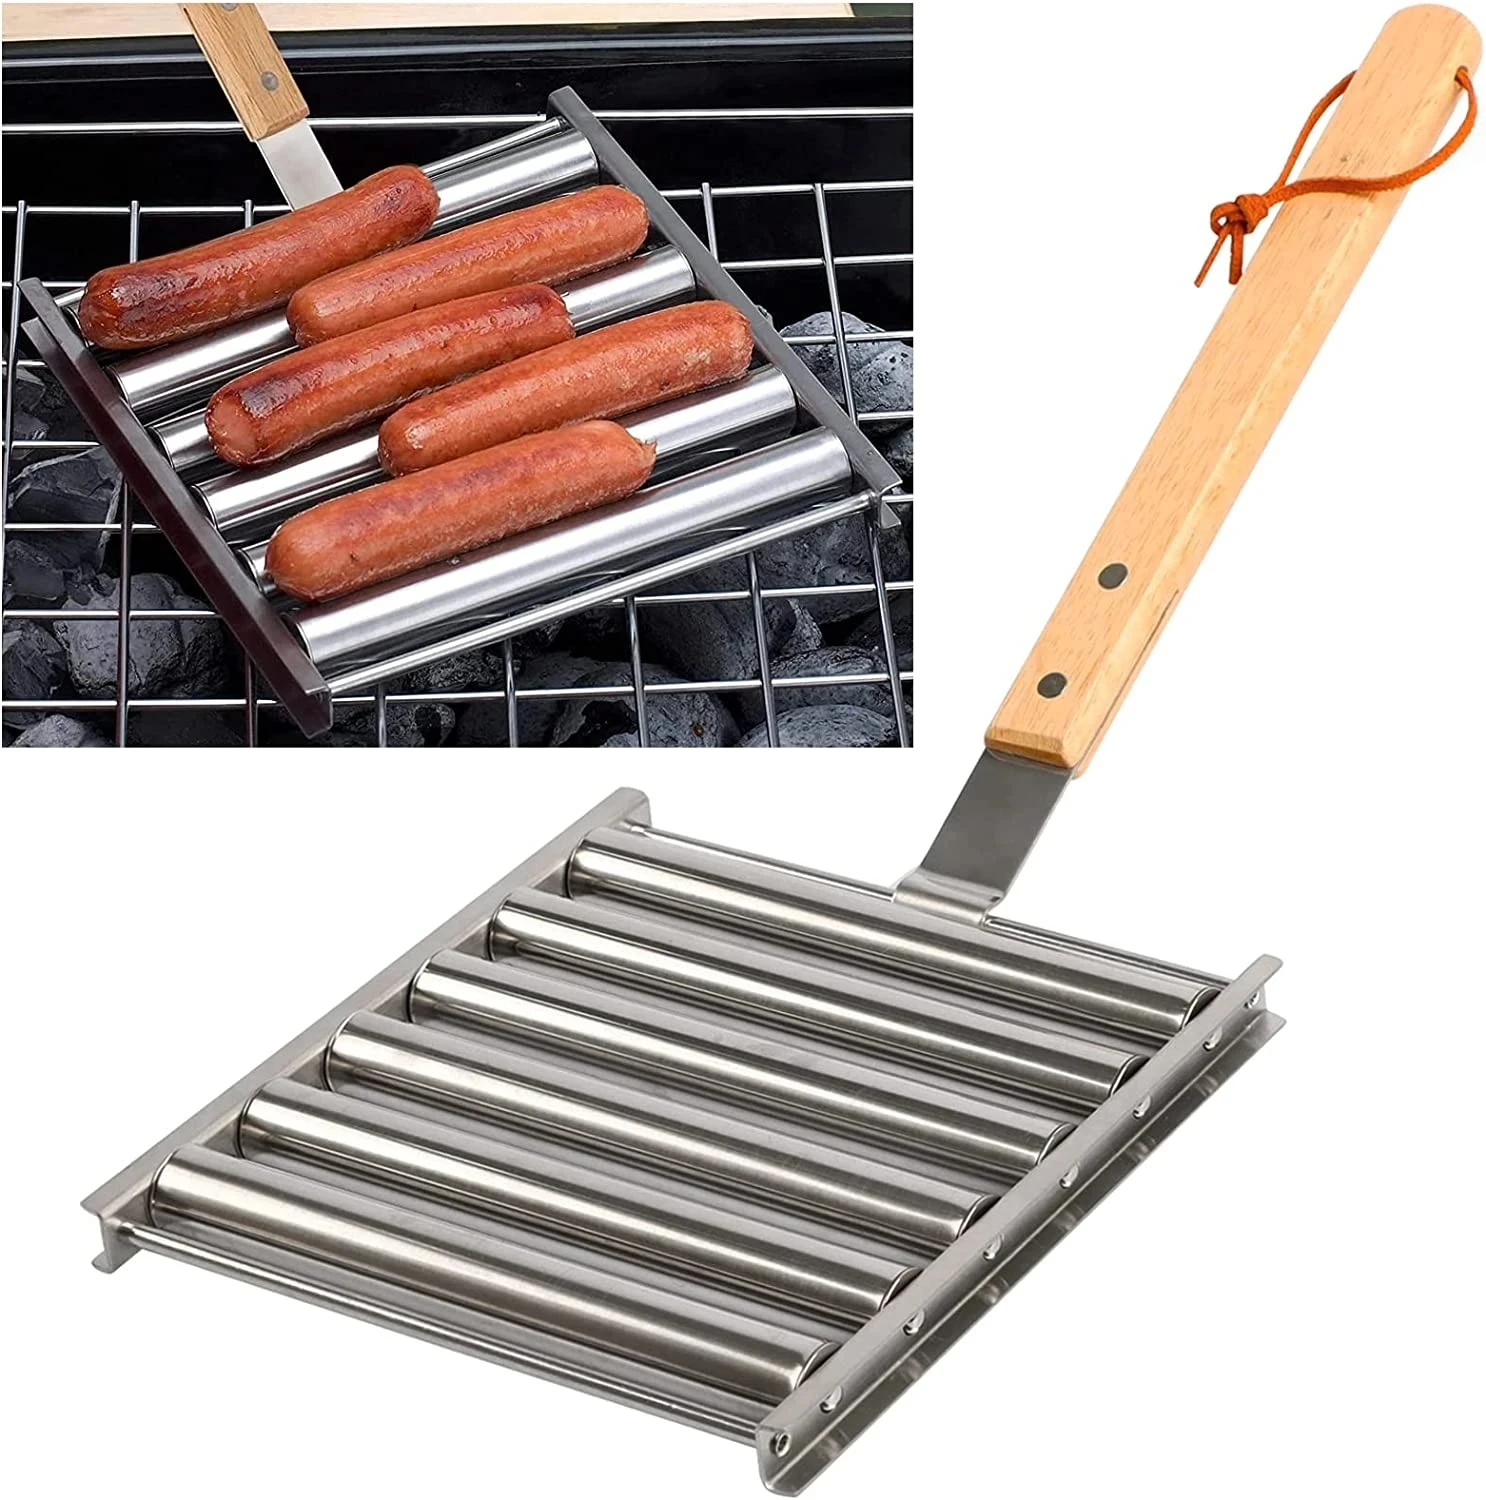 

Hot Dog Roller Stainless Steel Sausage Roller Rack with Extra Long Wood Handle, BBQ Hot Dog Griller for Evenly Cooked